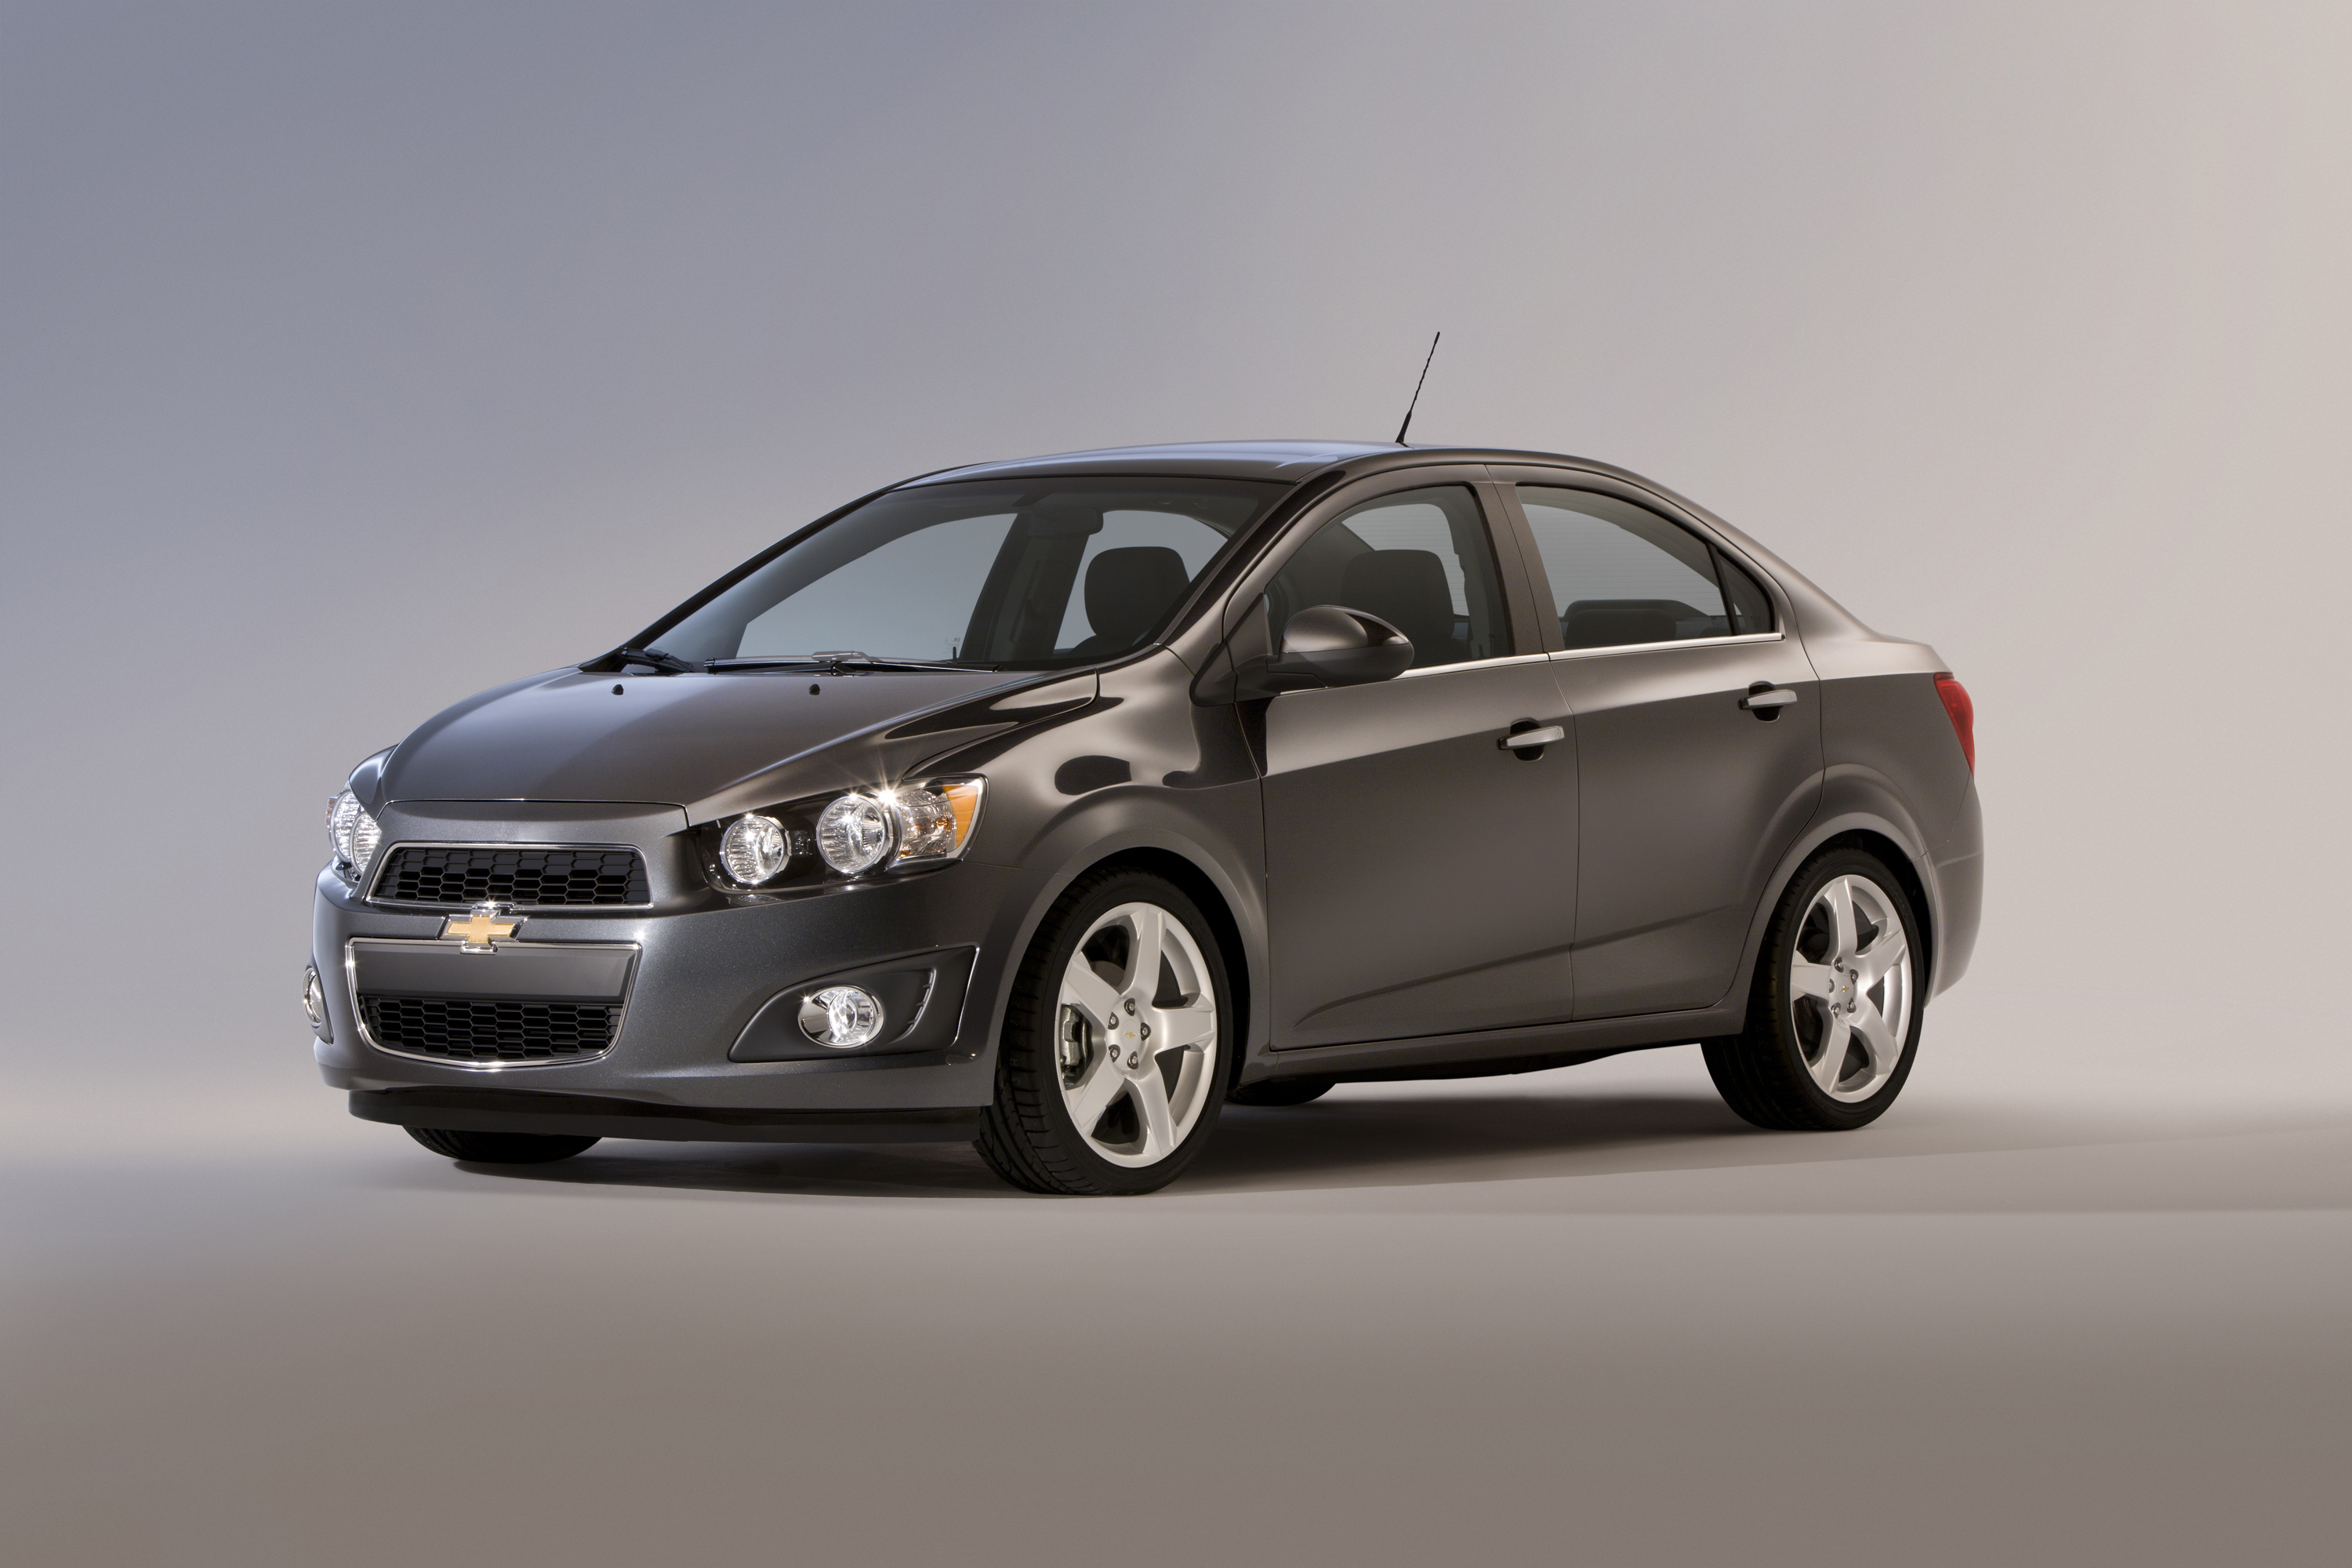 Chevrolet Announces Sonic Price Will Start at $14,495